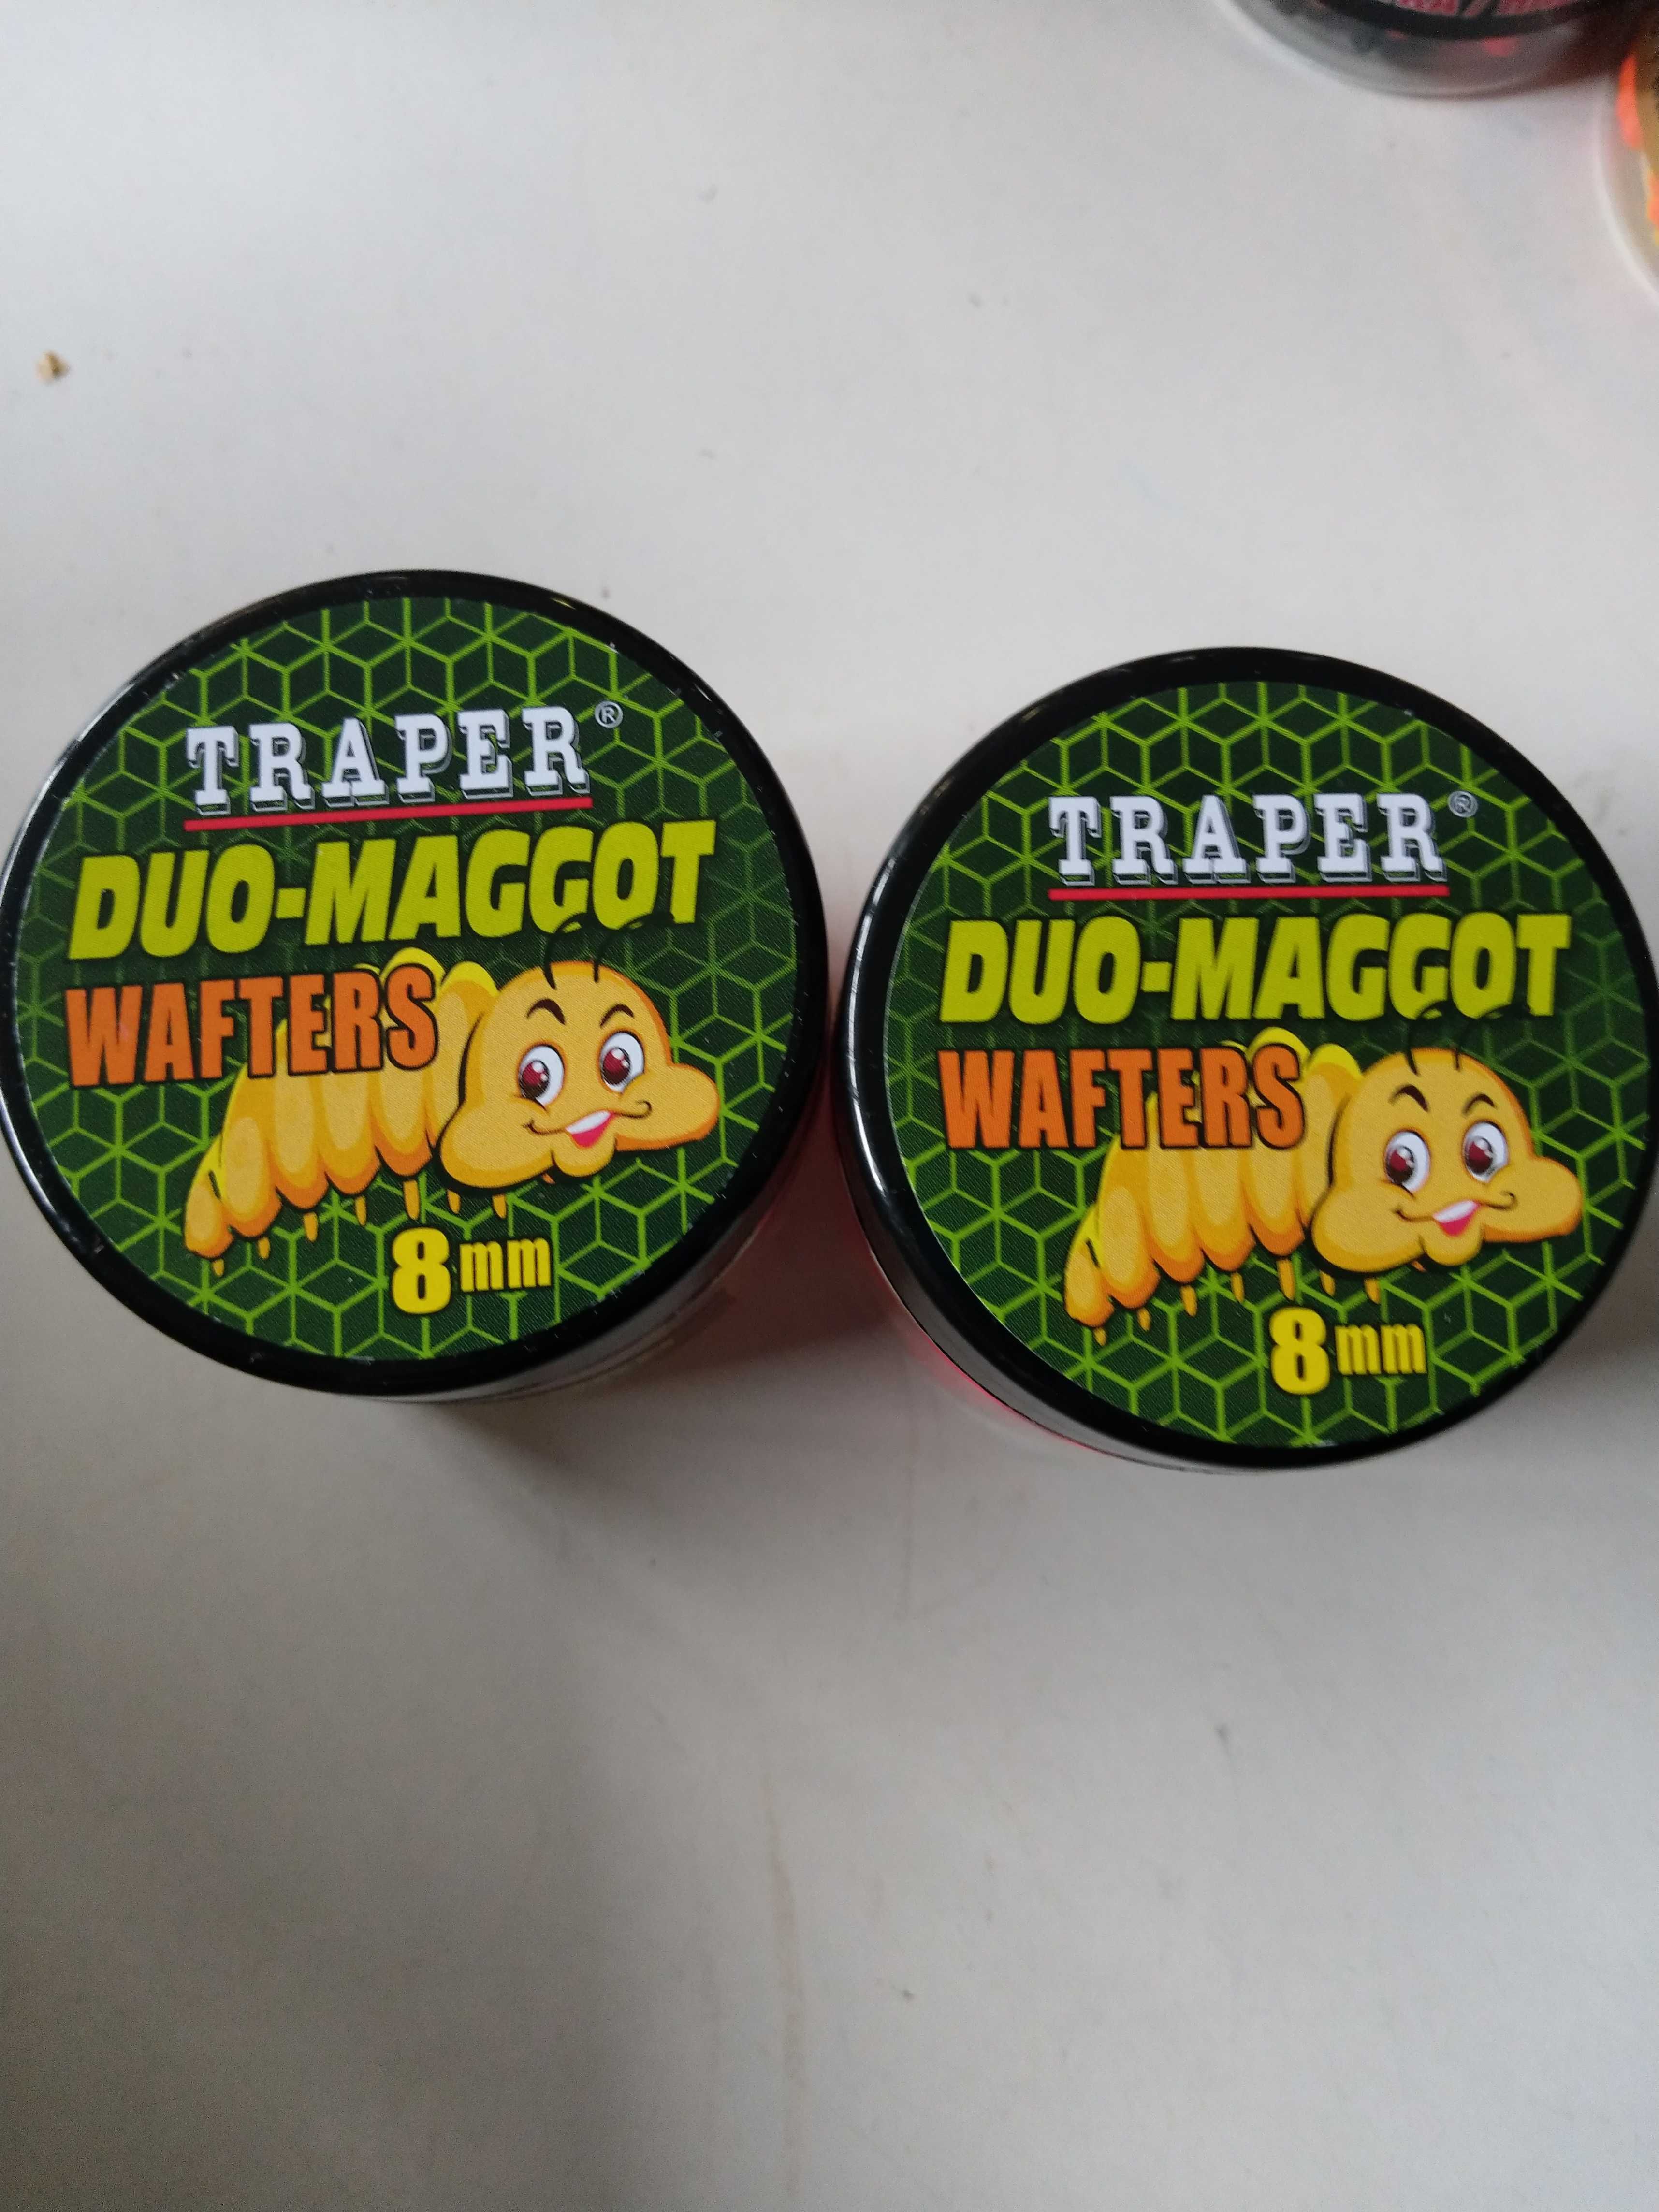 Traper Duo magot wafters 8mm